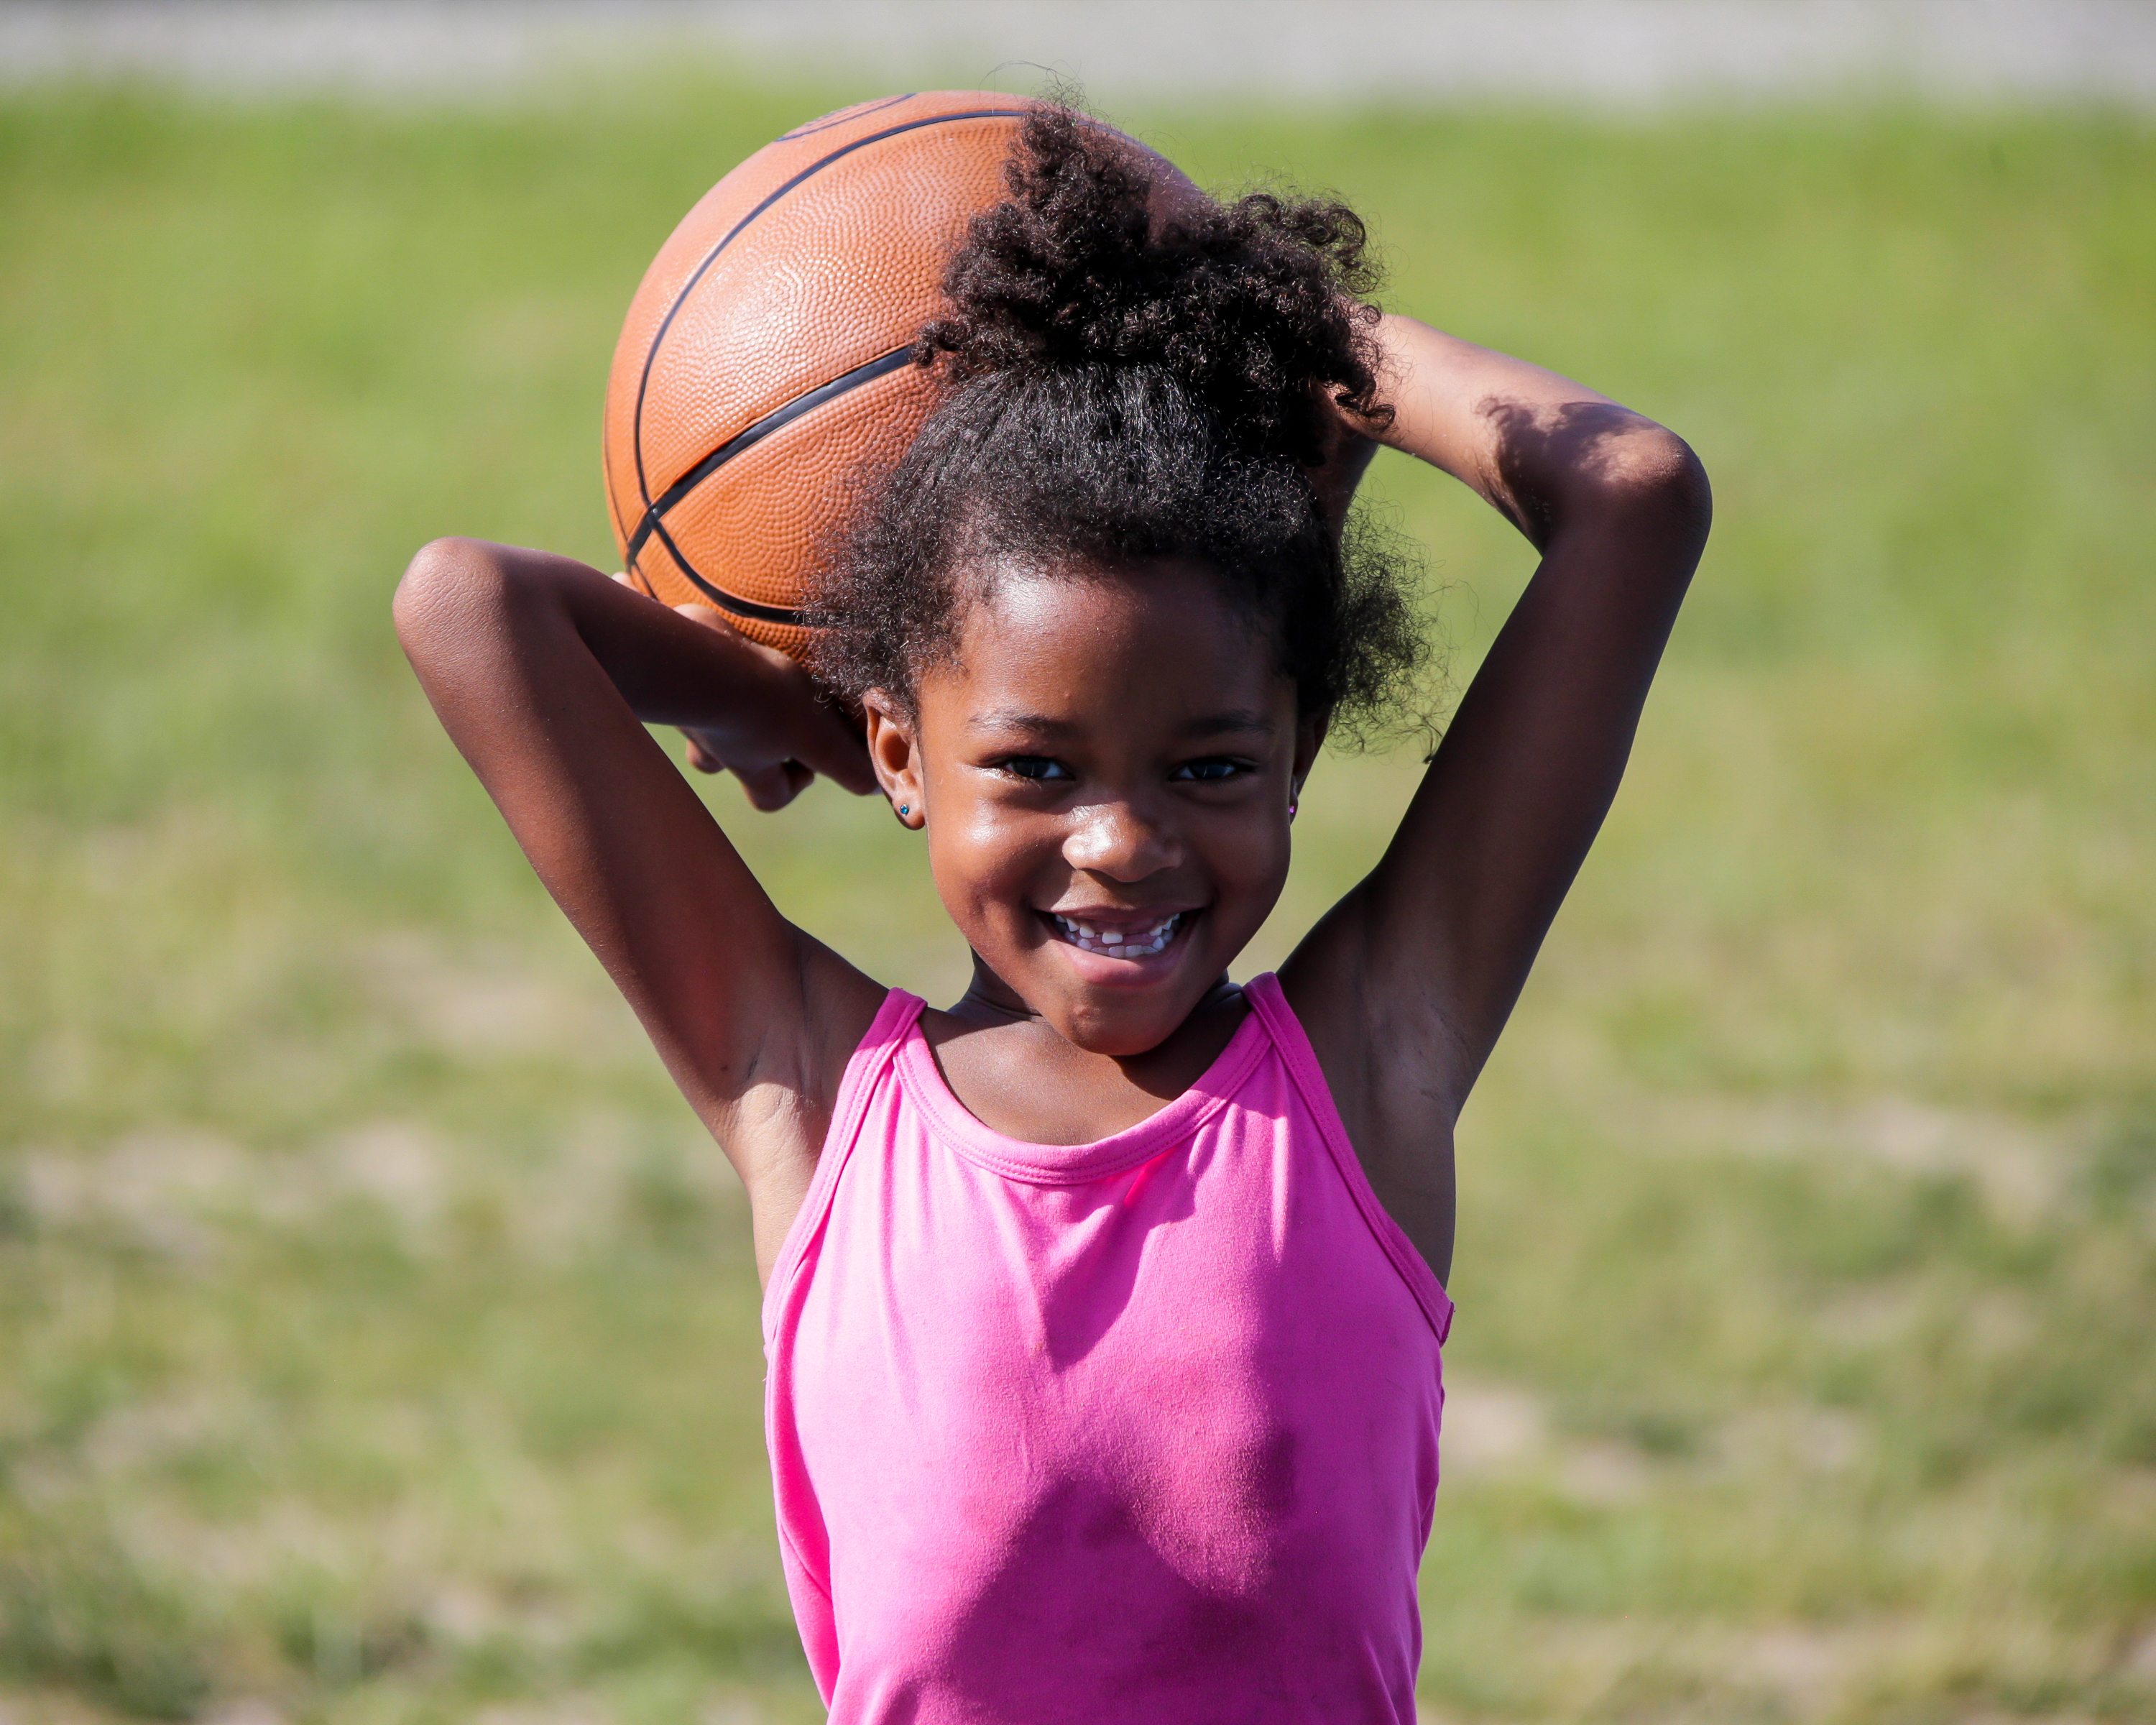 Image of a girl holding a basketball